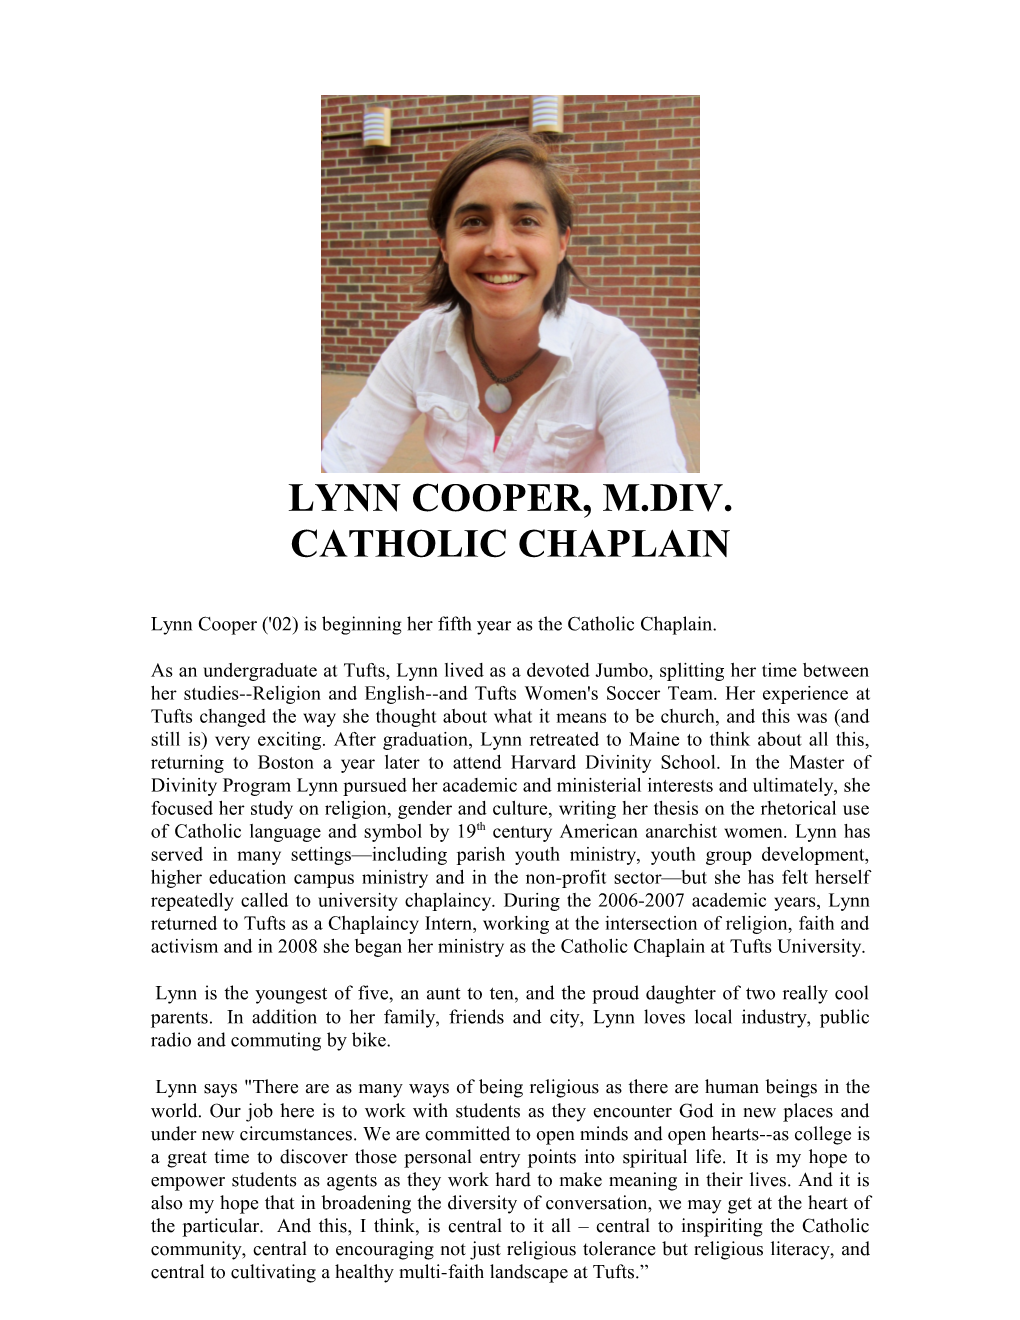 Lynn Cooper ('02) Is Beginning Her First Year As the Catholic Chaplain